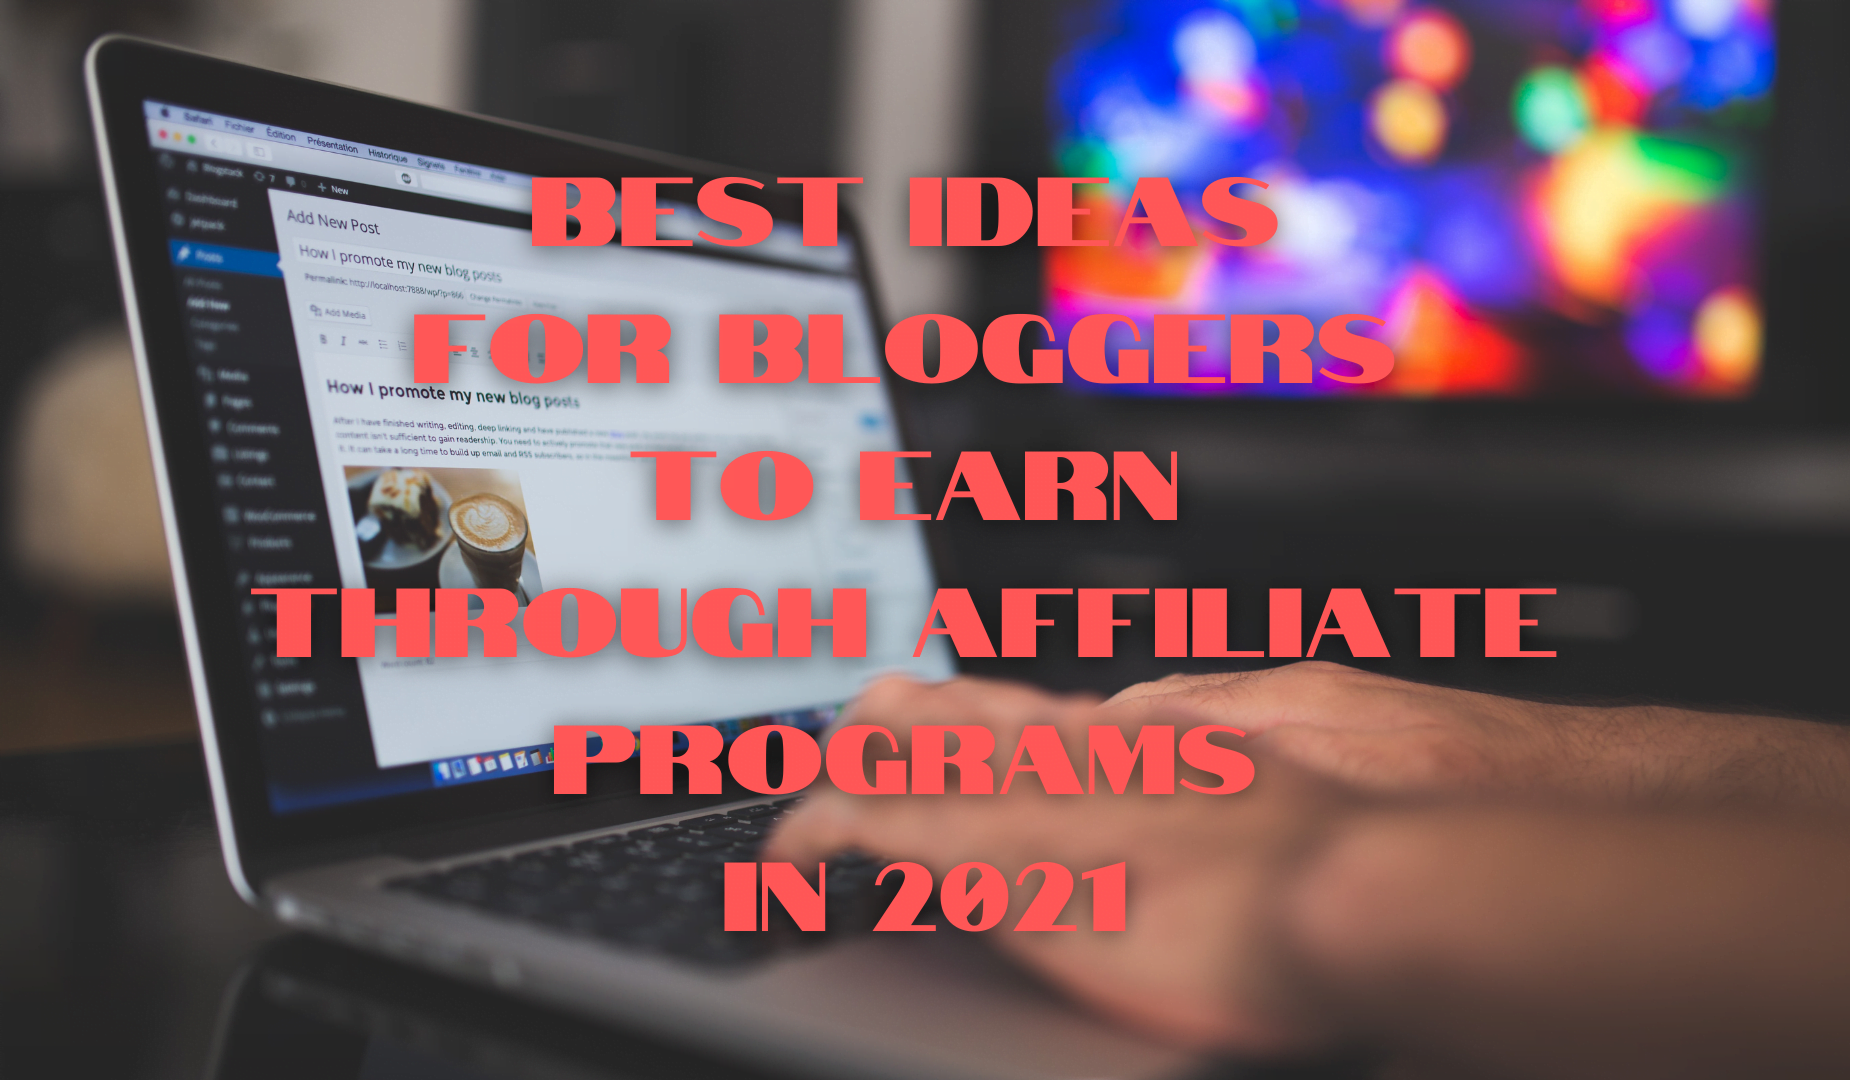 Best Ideas For Bloggers To Earn Through Affiliate Programs In 2021